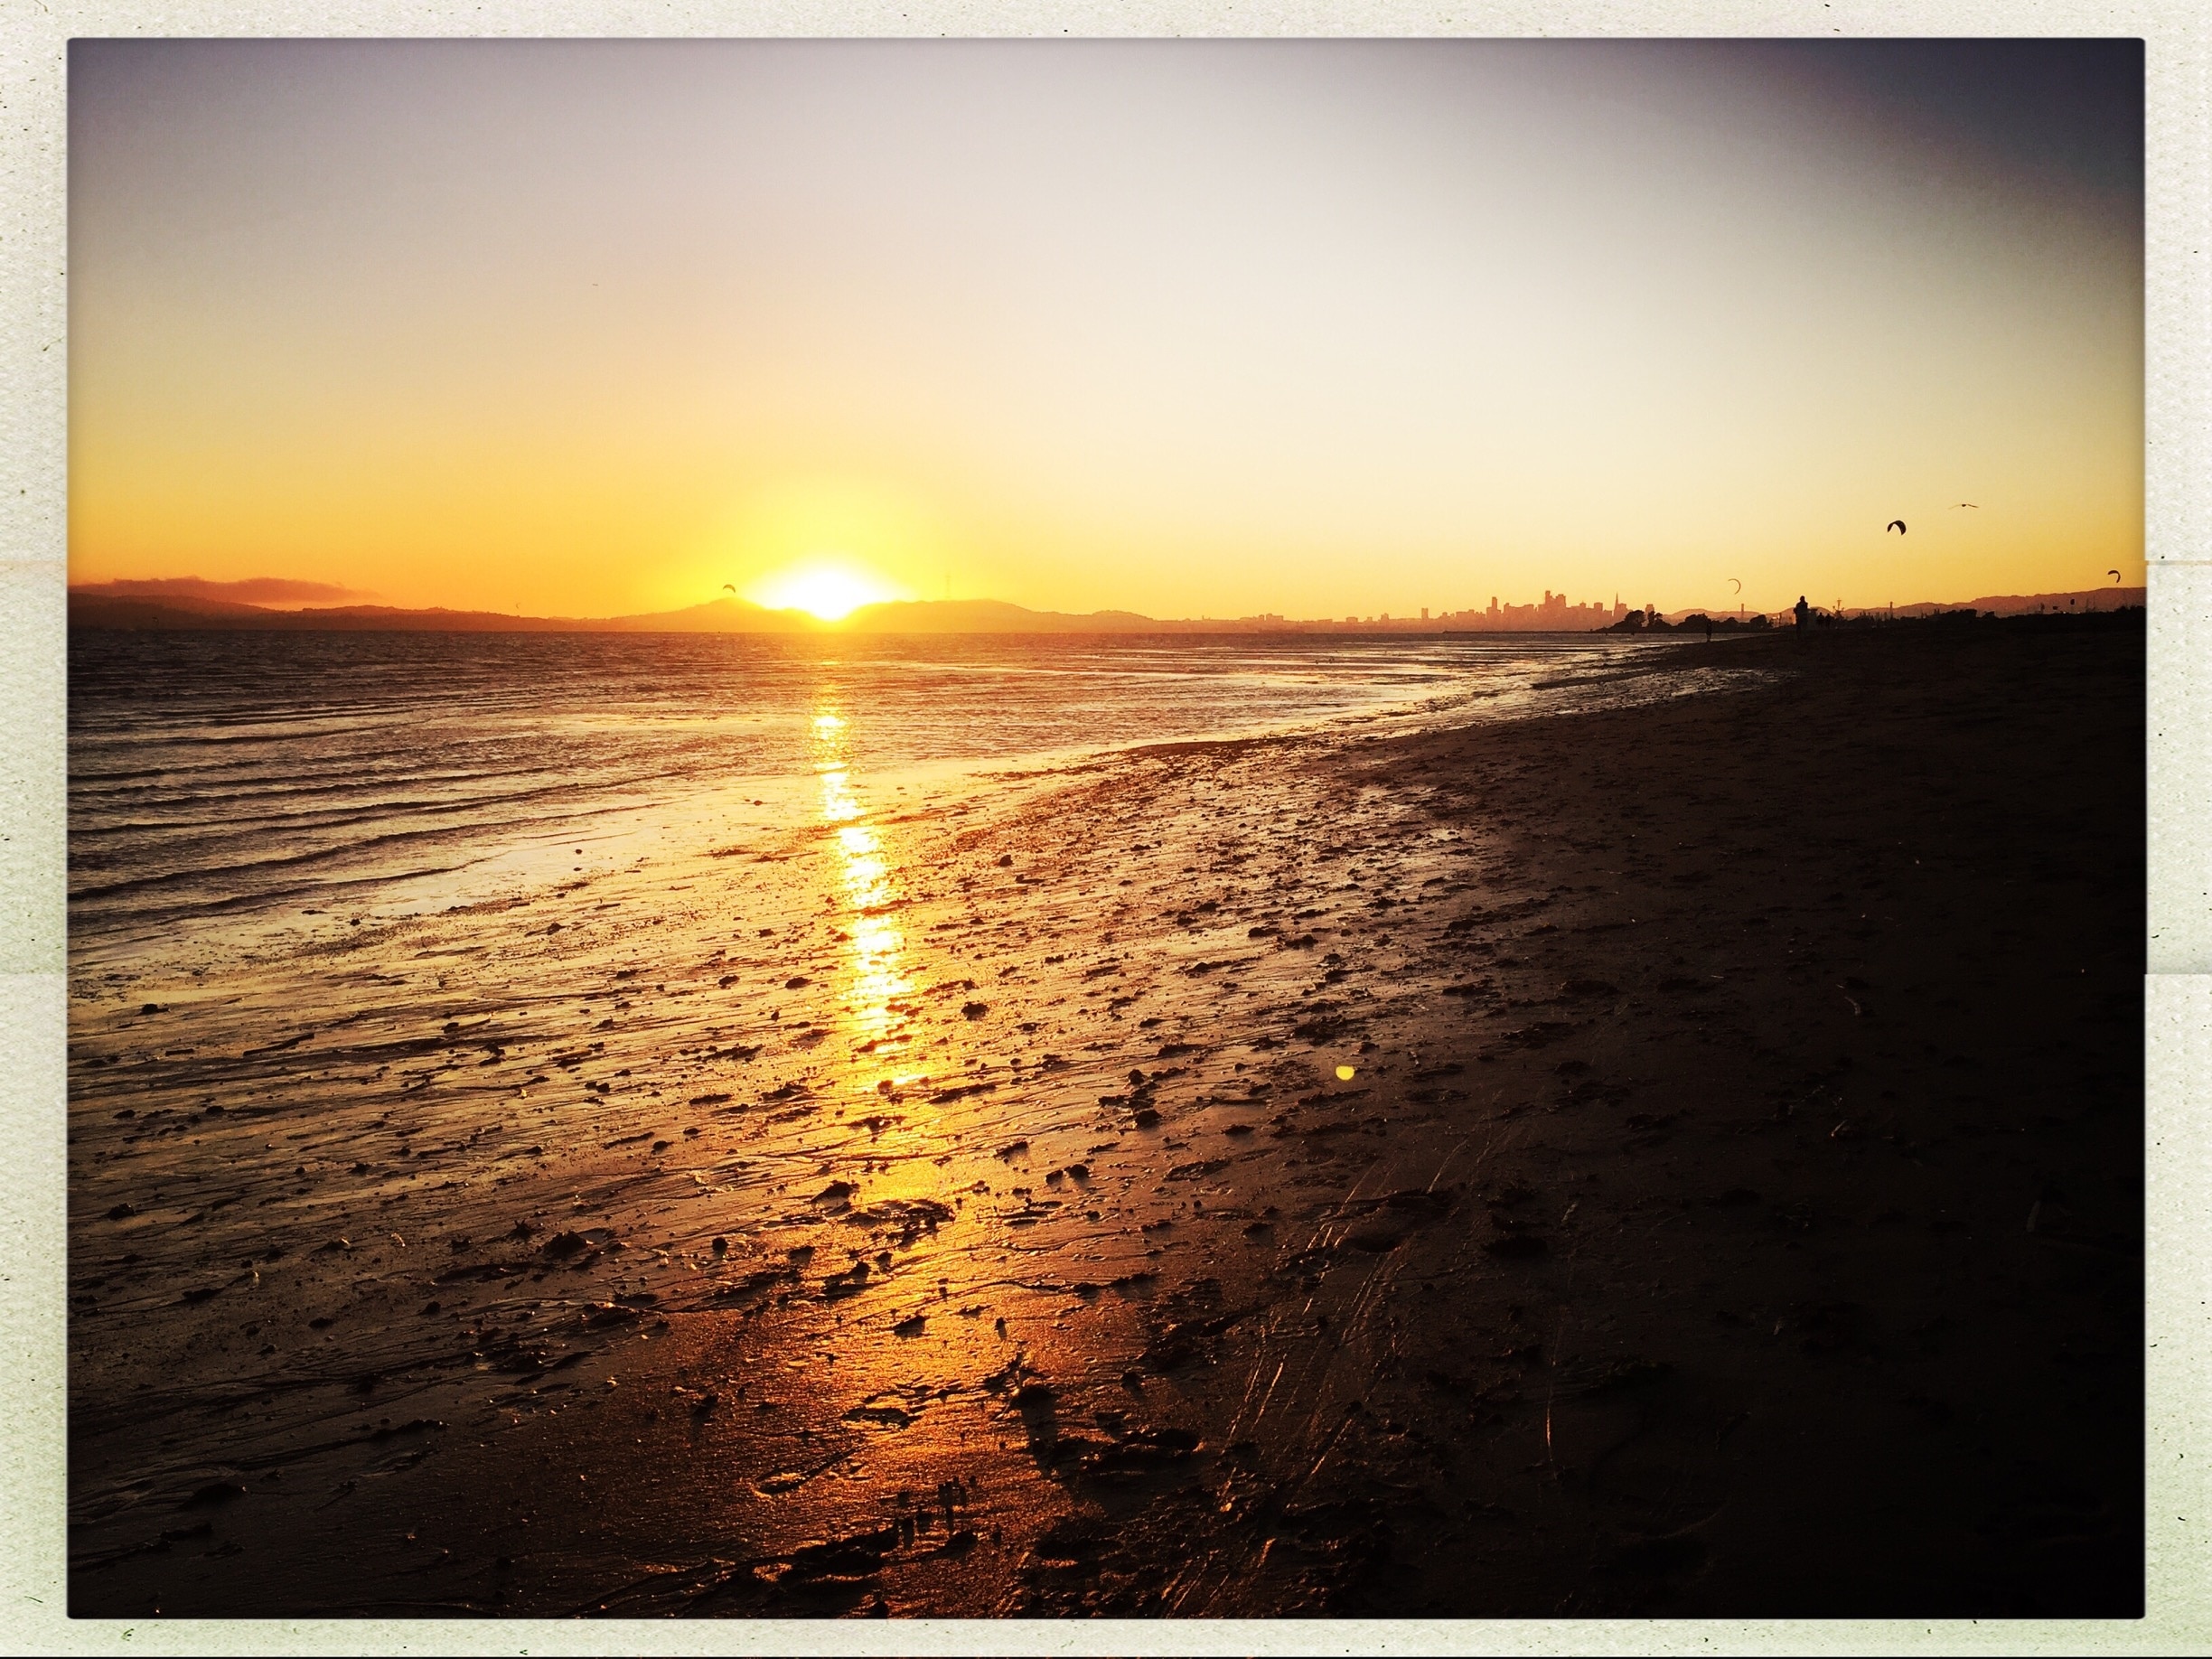 Sunset over the kite surfing beach in Alameda